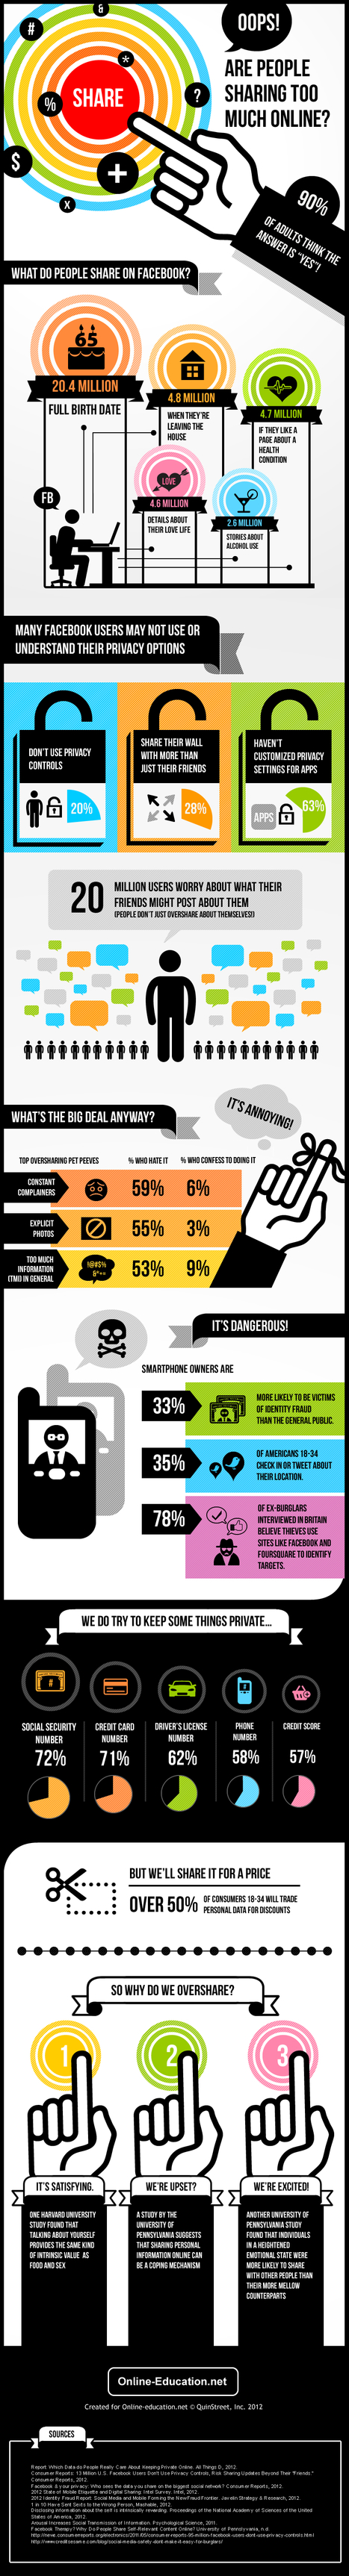 Do You Share Too Much on Social Media? [INFOGRAPHIC] | BI Revolution | Scoop.it